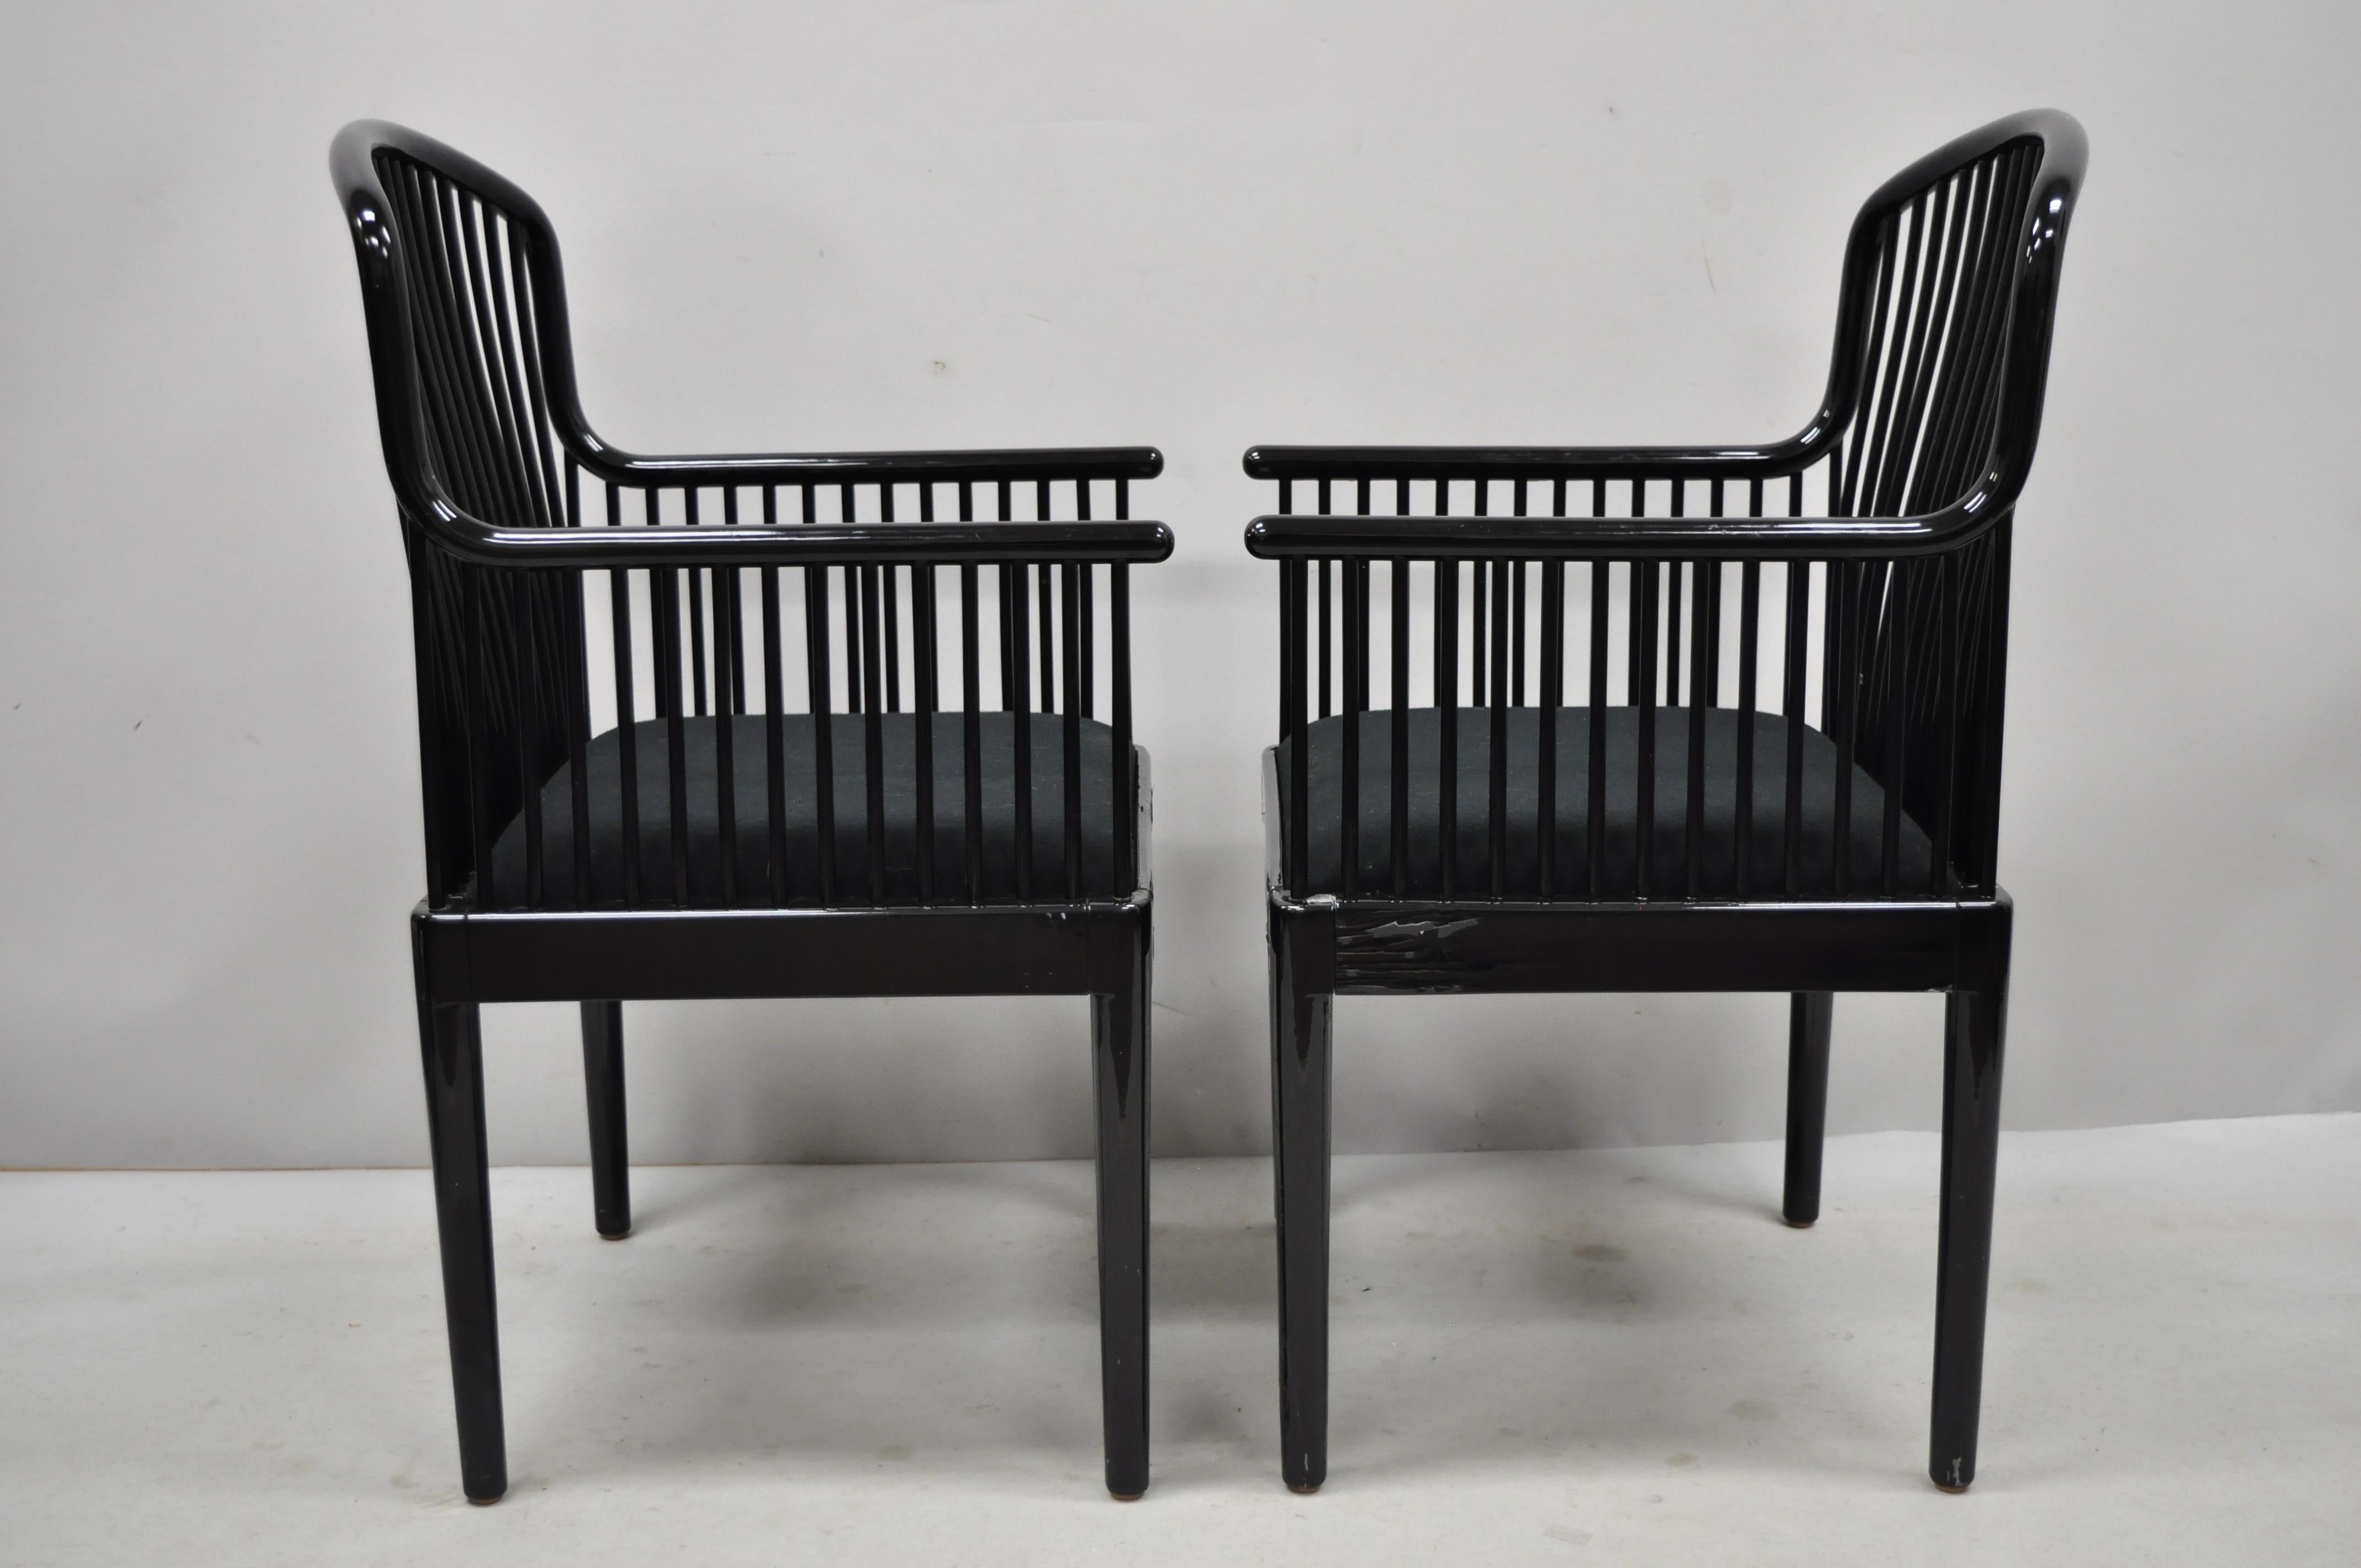 Pair of Black Lacquer Modern Andover Armchairs by Davis Allen for Stendig 'C' 1